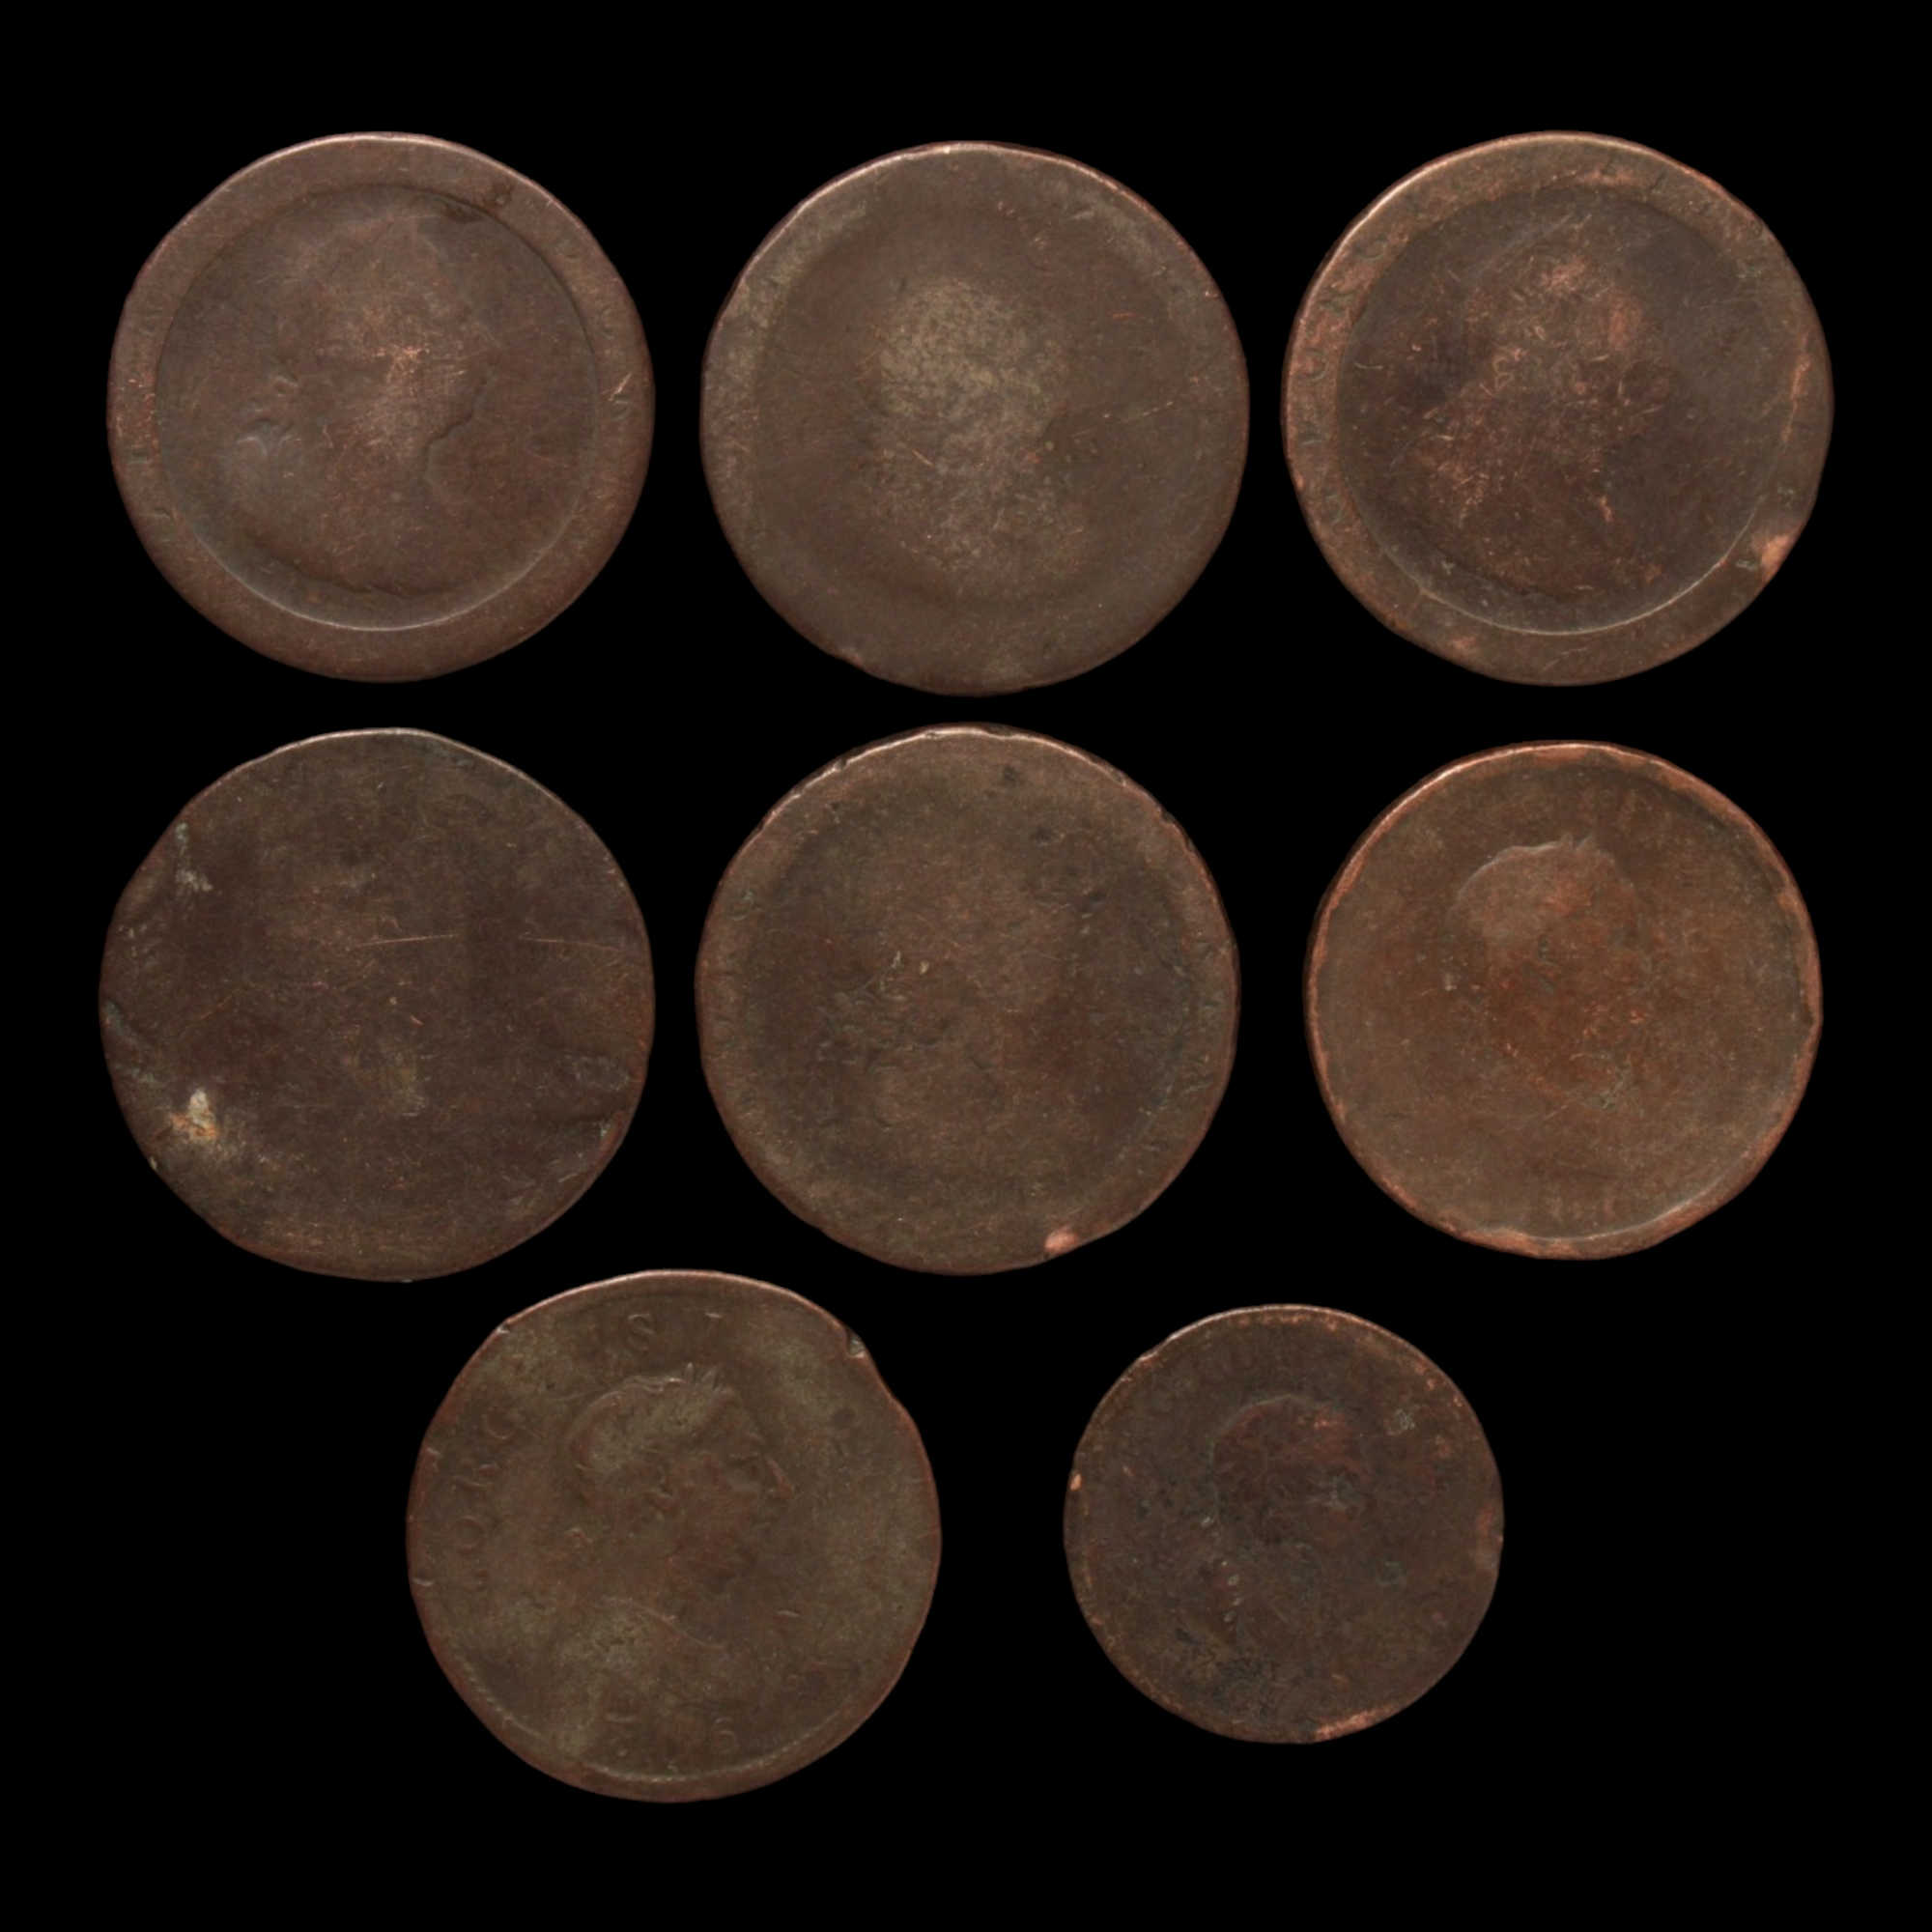 Lot of 8 British Coppers, George III, Low Grade - 1790s to 1800s - Great Britain